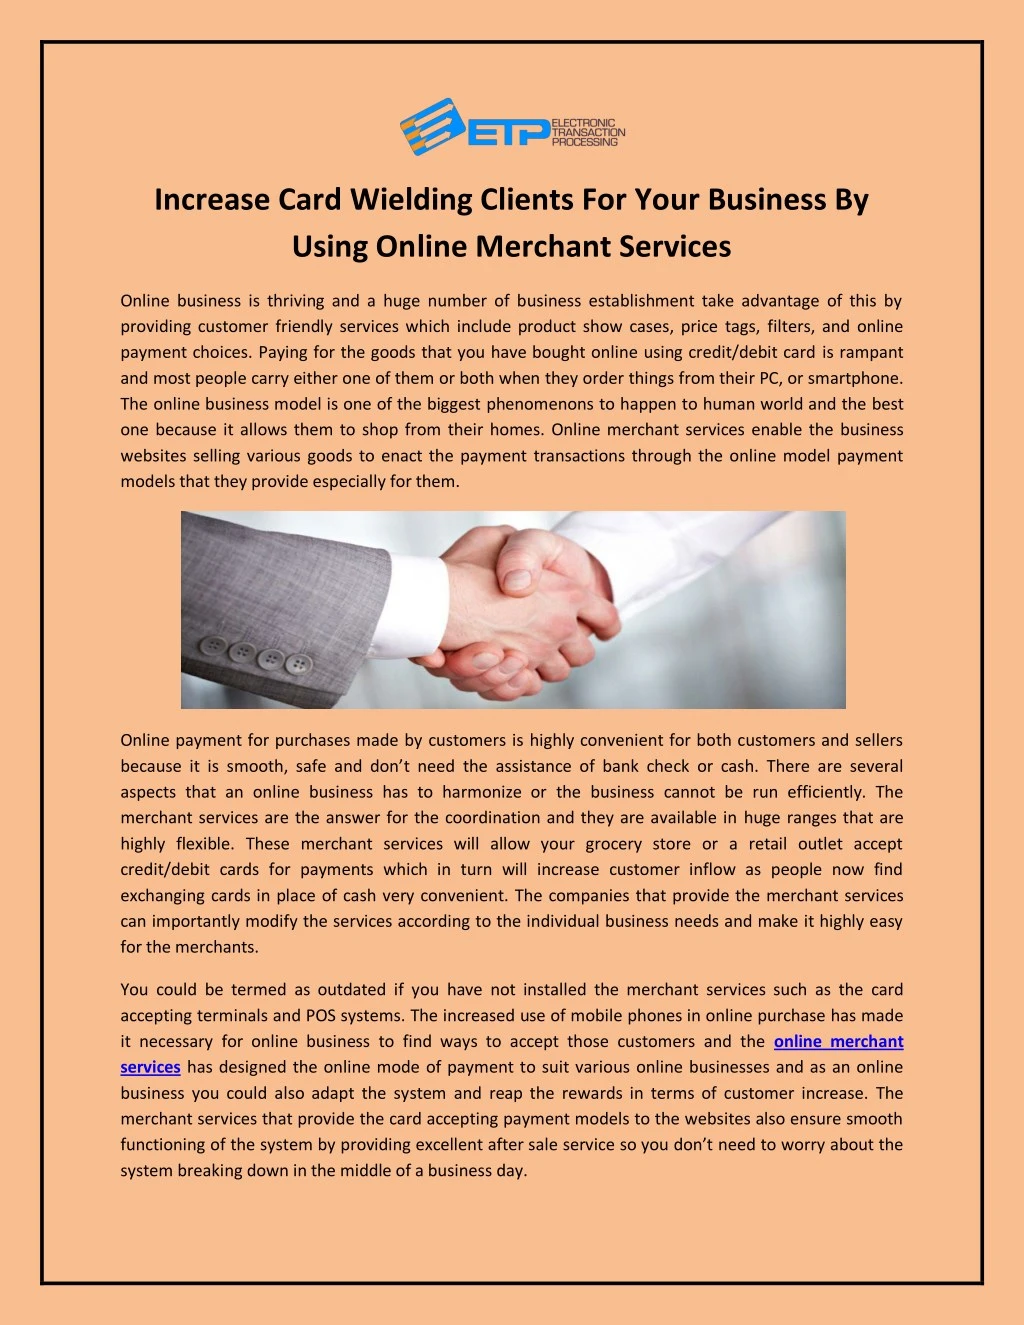 increase card wielding clients for your business